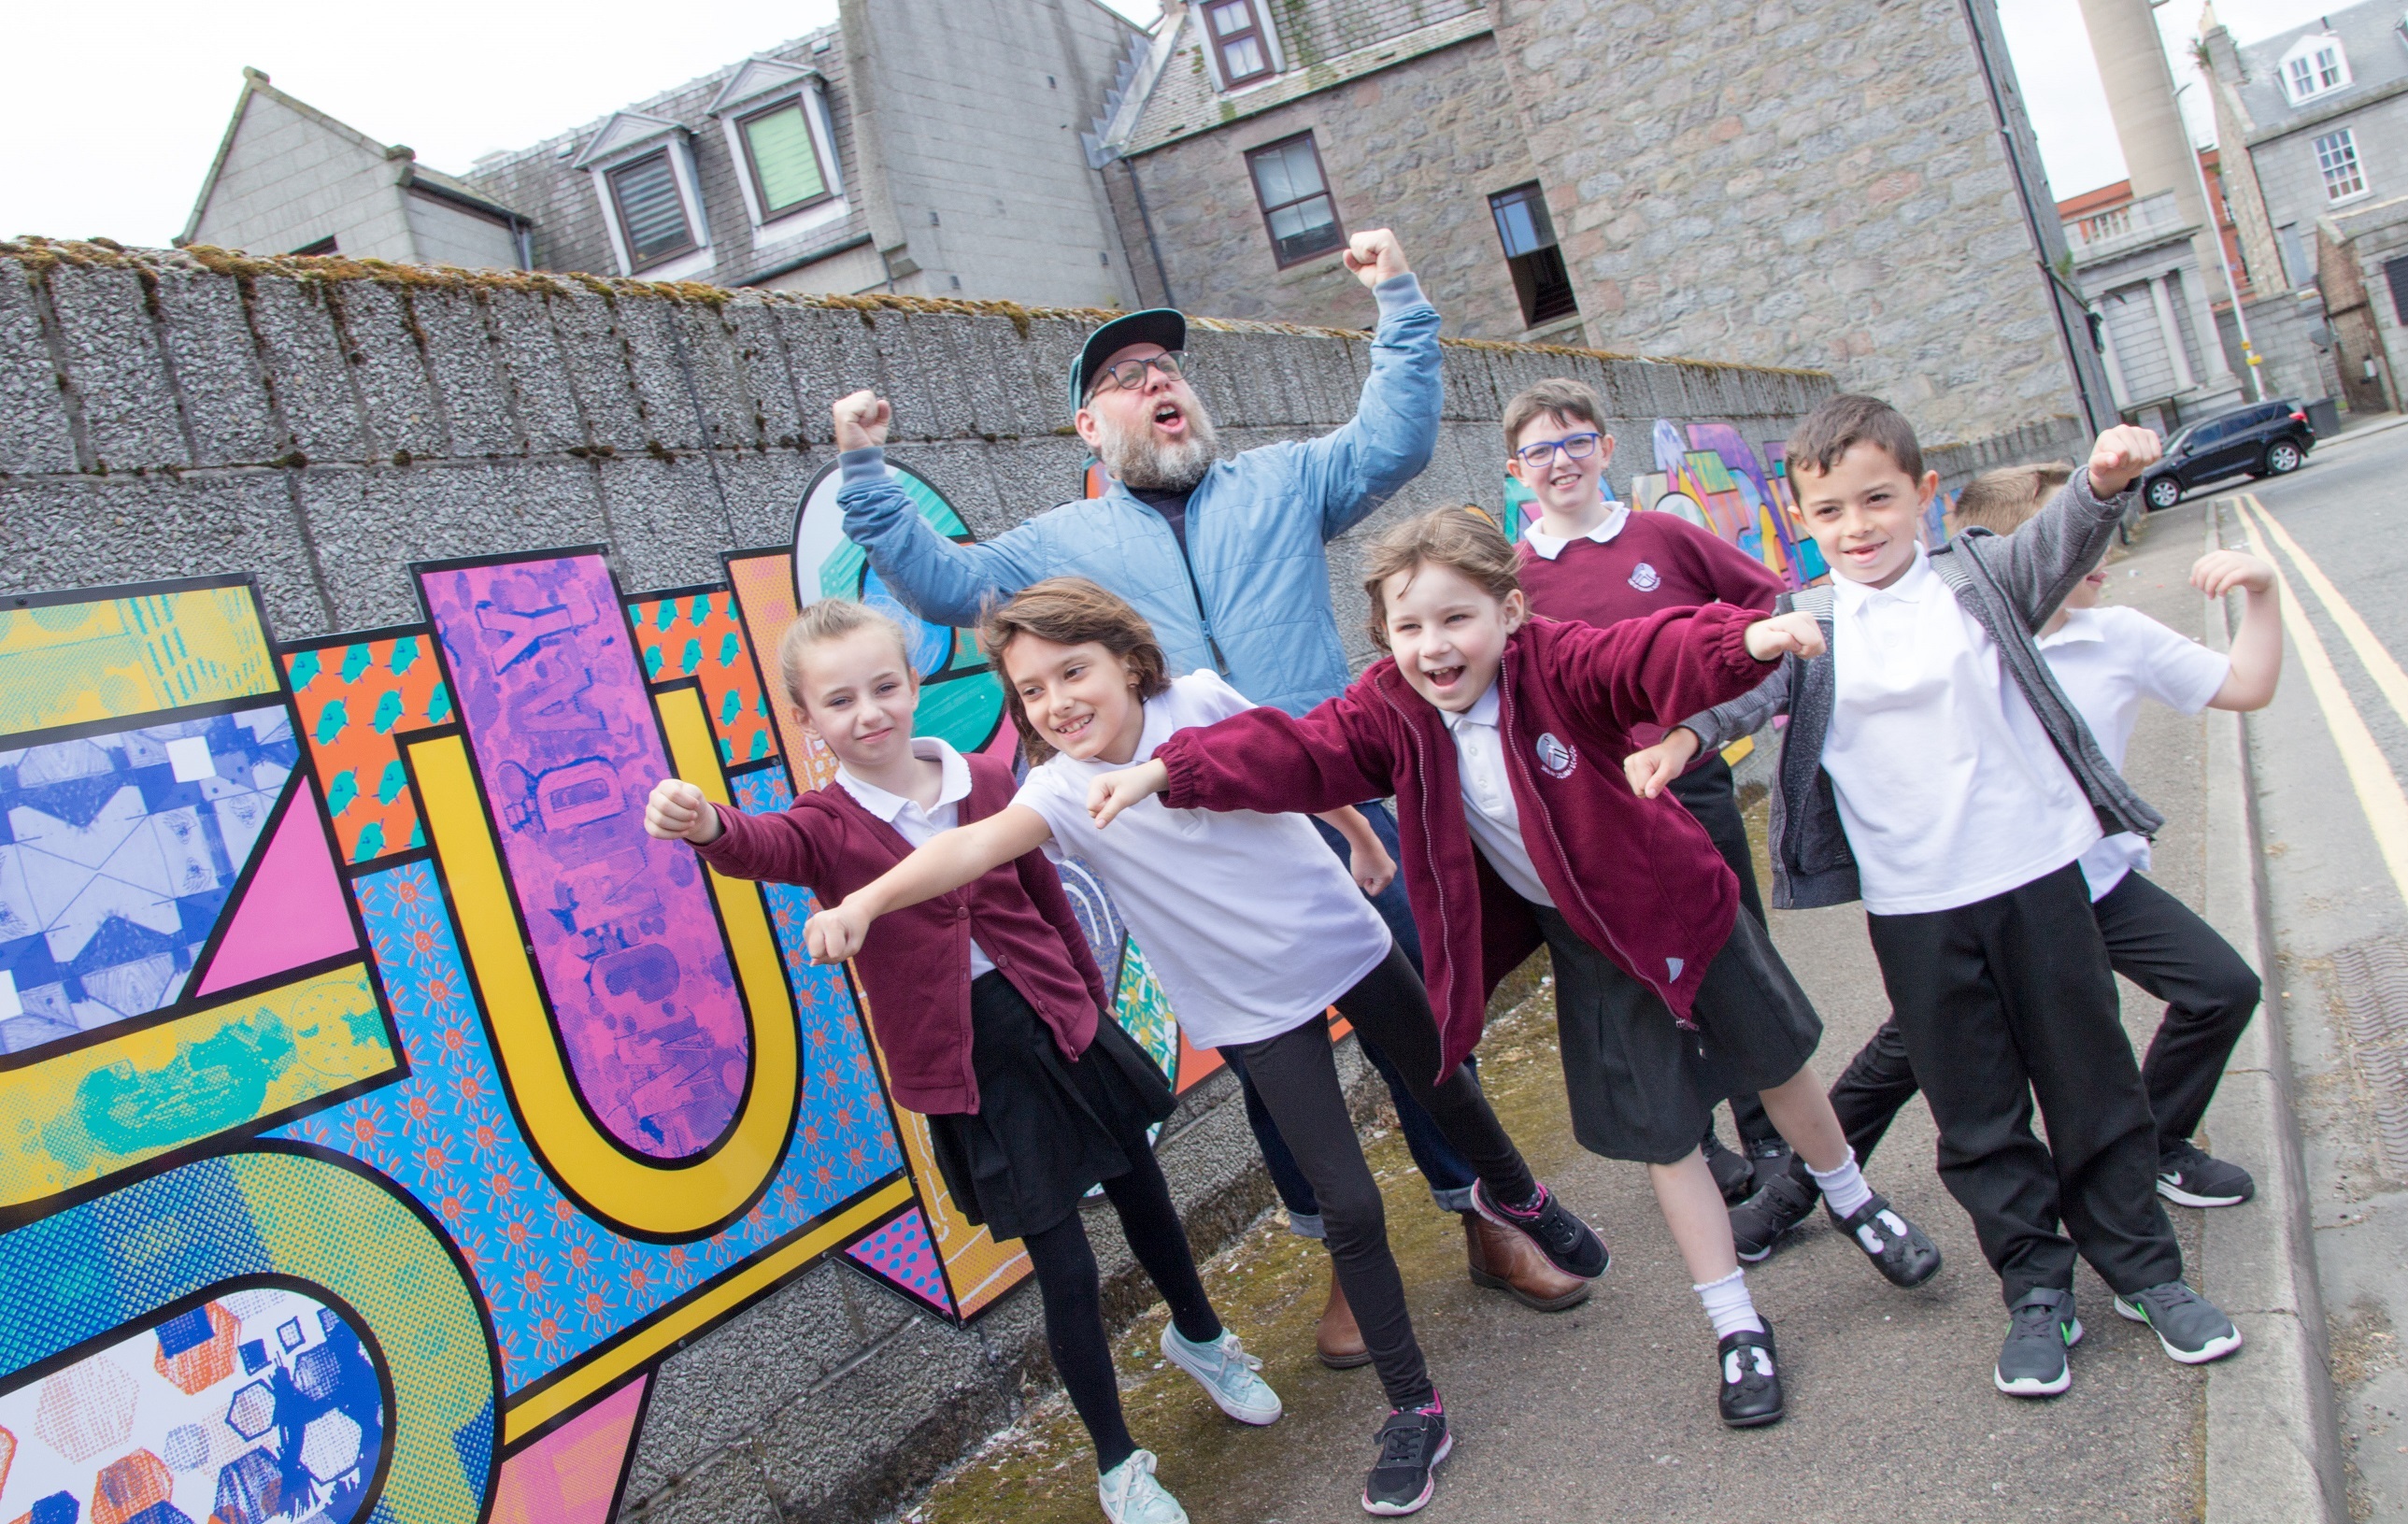 Artist Supermundane (Rob Lowe) launched the Look Again festival with the help of some local youngsters.